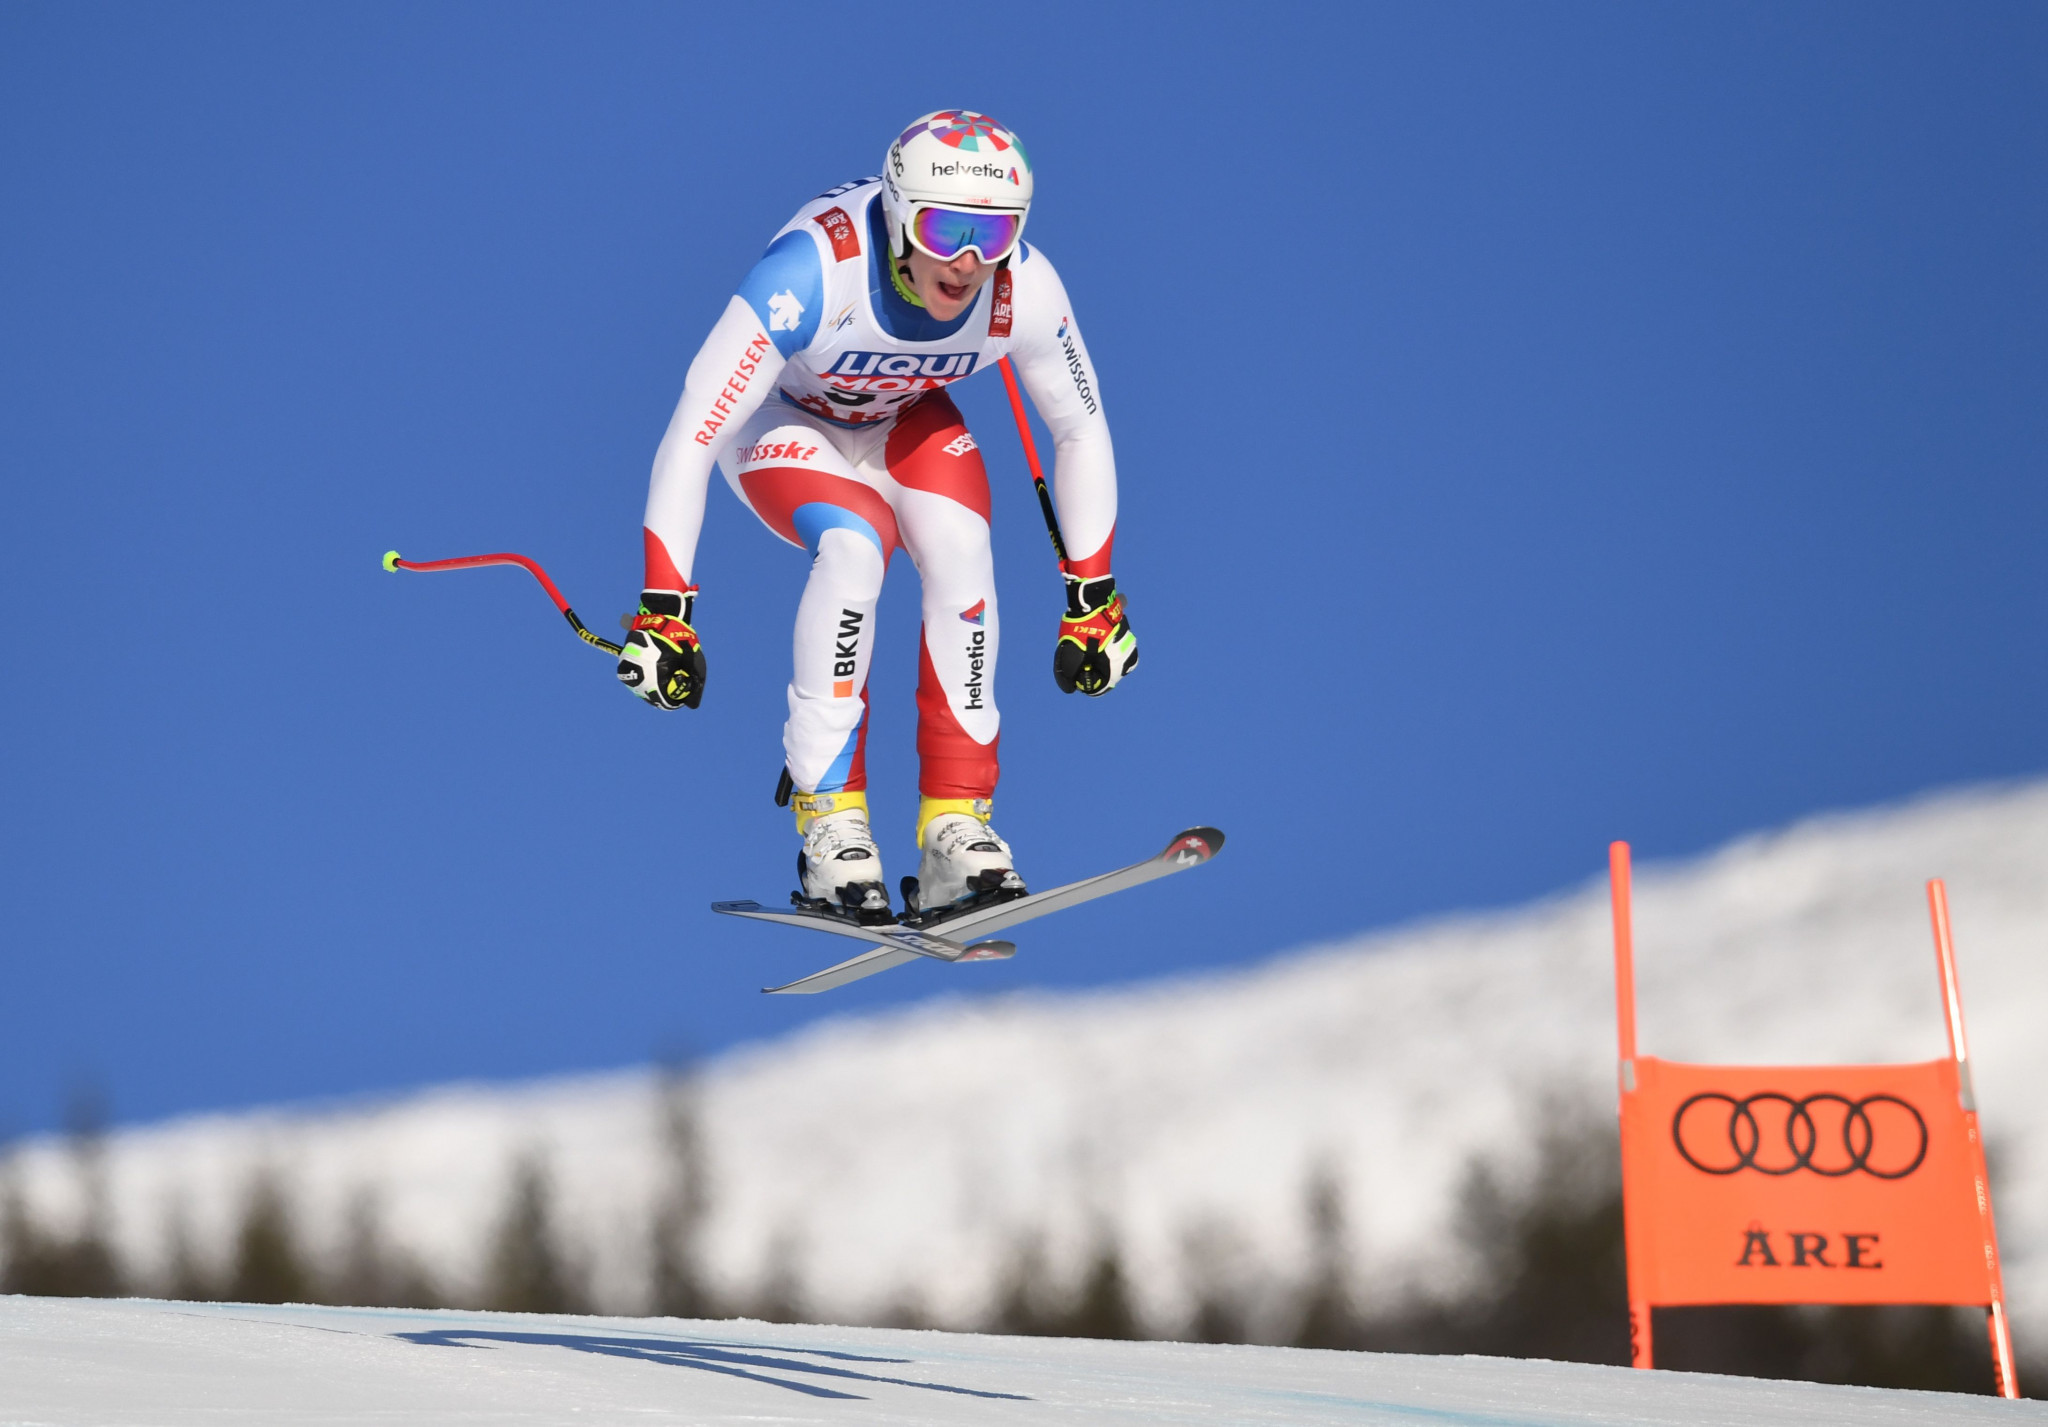 Gian-Franco Kasper's comments came during the ongoing FIS Alpine Skiing World Championships in Sweden ©Getty Images